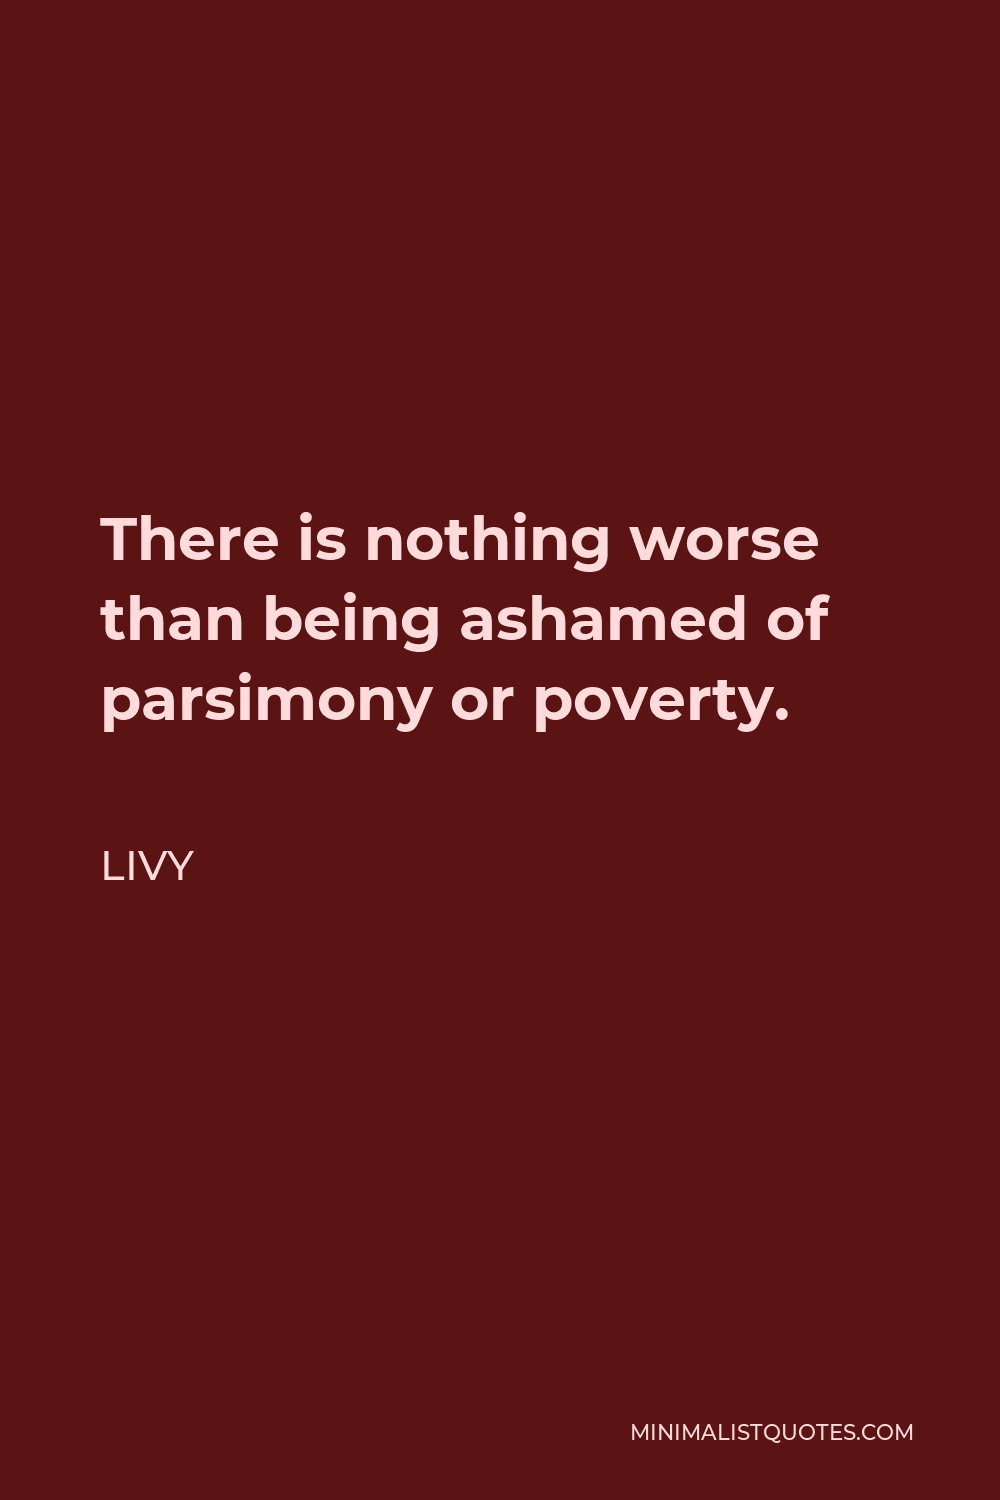 Livy Quote - There is nothing worse than being ashamed of parsimony or poverty.